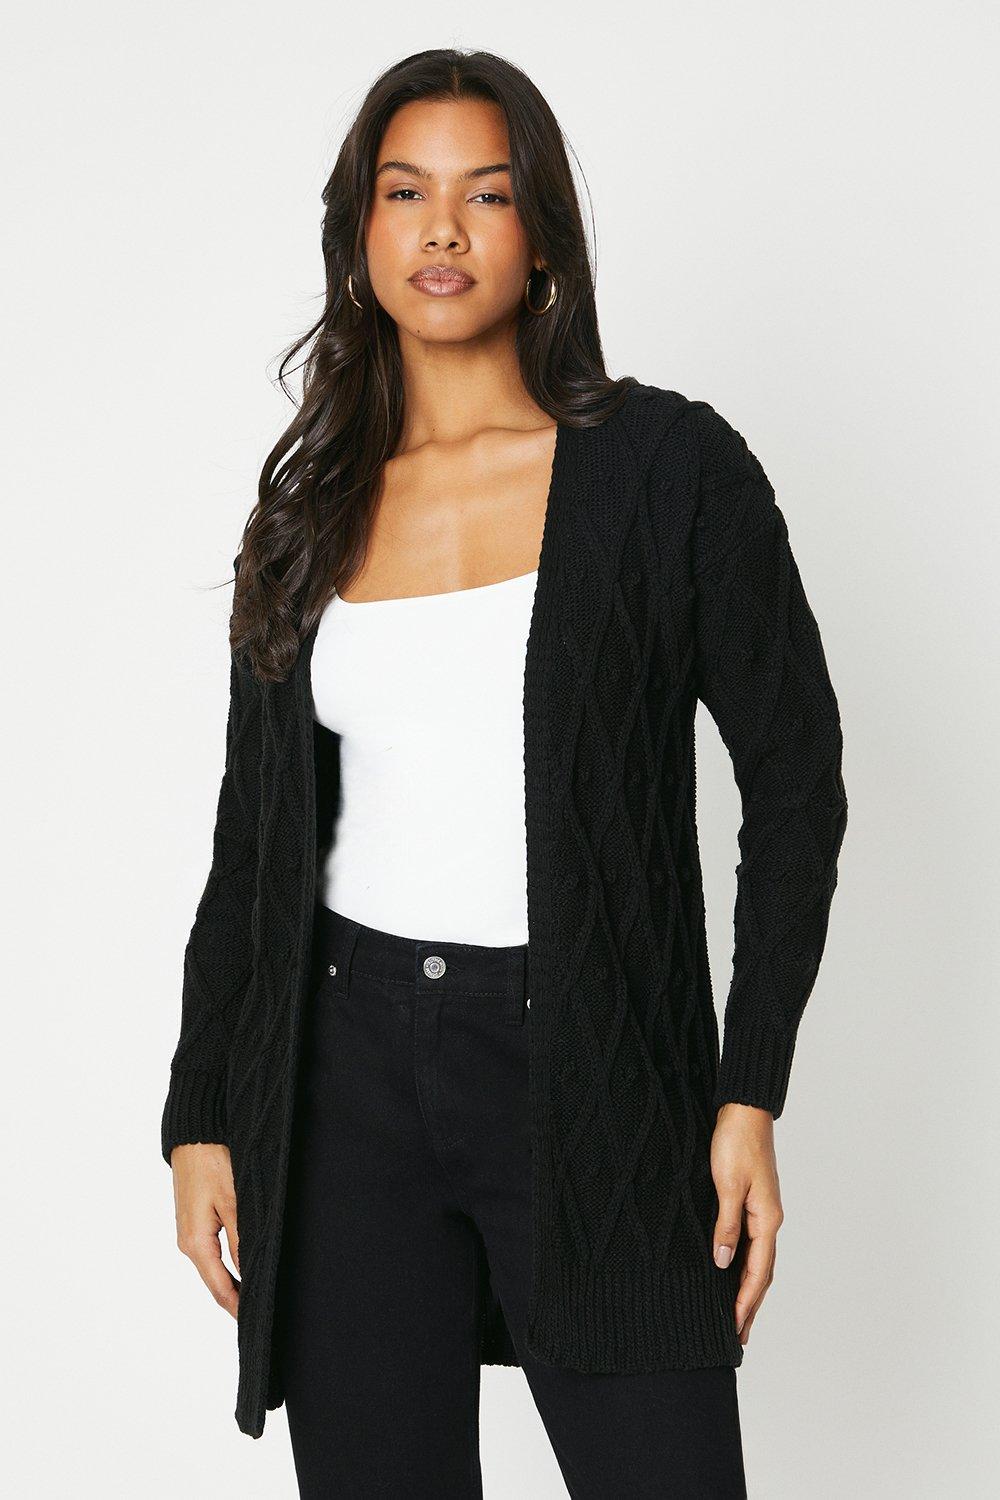 Women’s Tall Cable Longline Cardigan - black - S